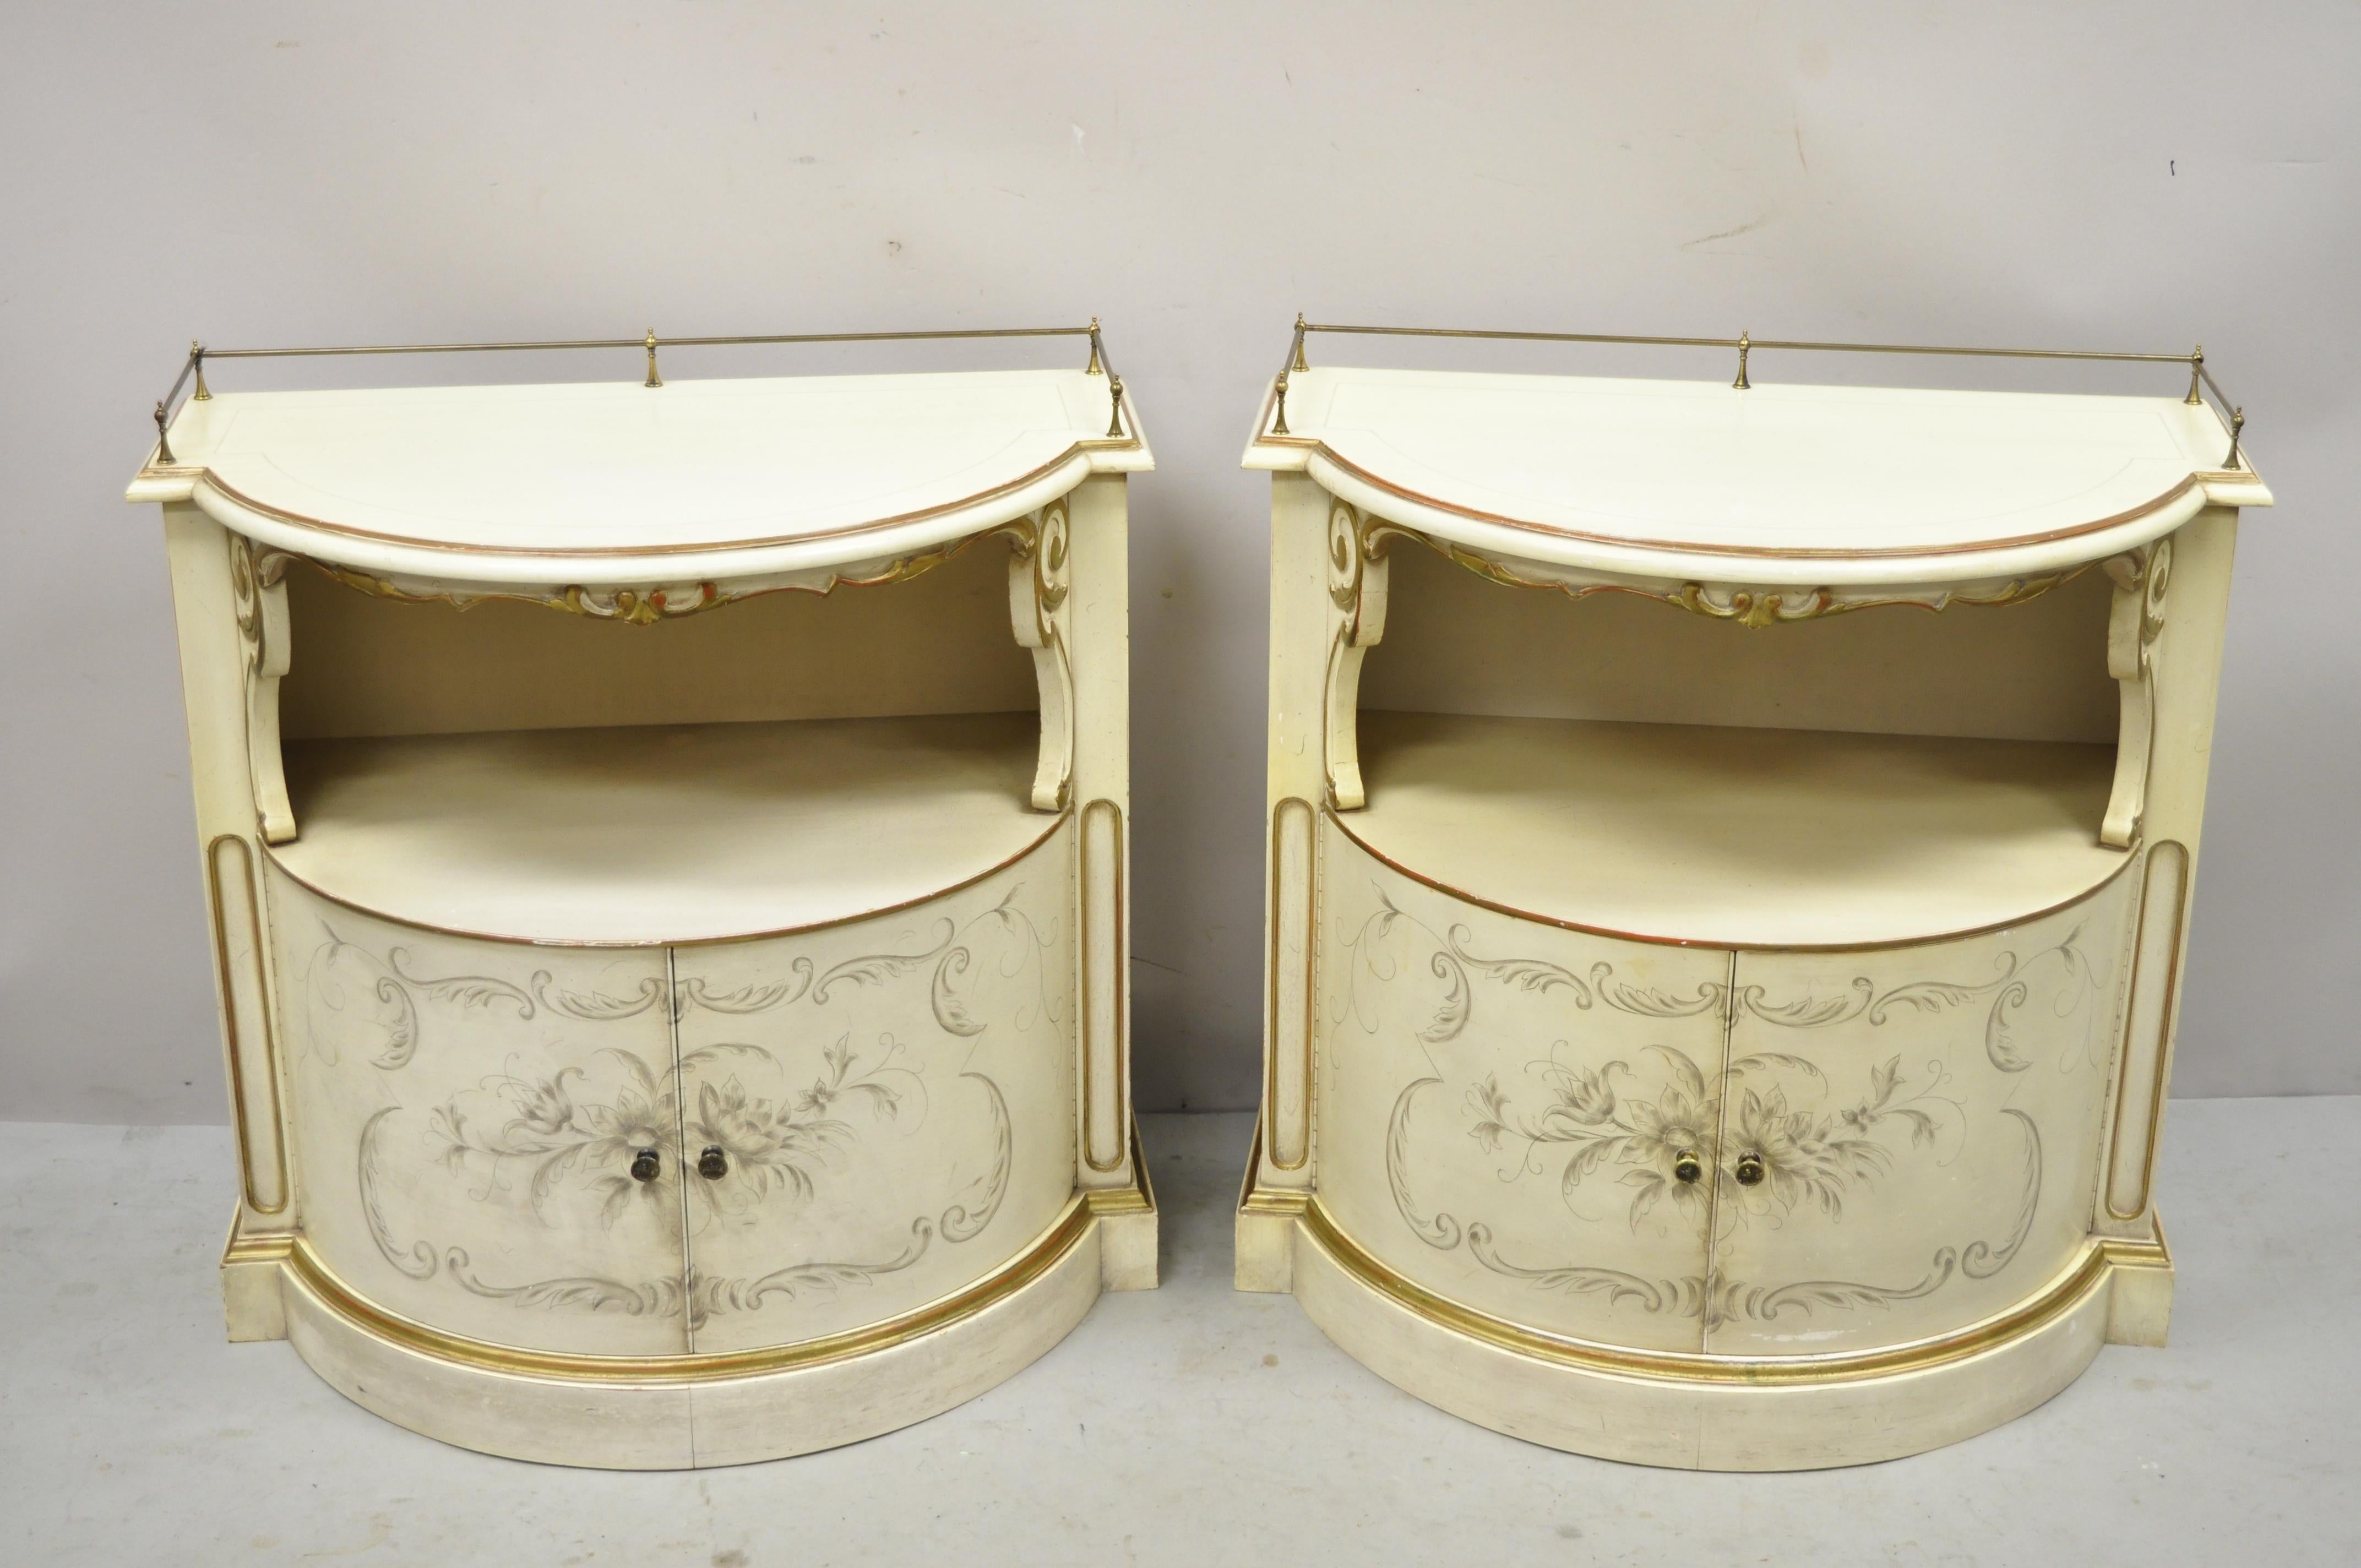 Italian Provincial Cream Half Round Demilune Nightstand Bedside Cabinet - a Pair. Item features paint decorated door front and sides, brass gallery, shapely demilune form, great style and form. Circa Mid 20th Century. Measurements: 27.5